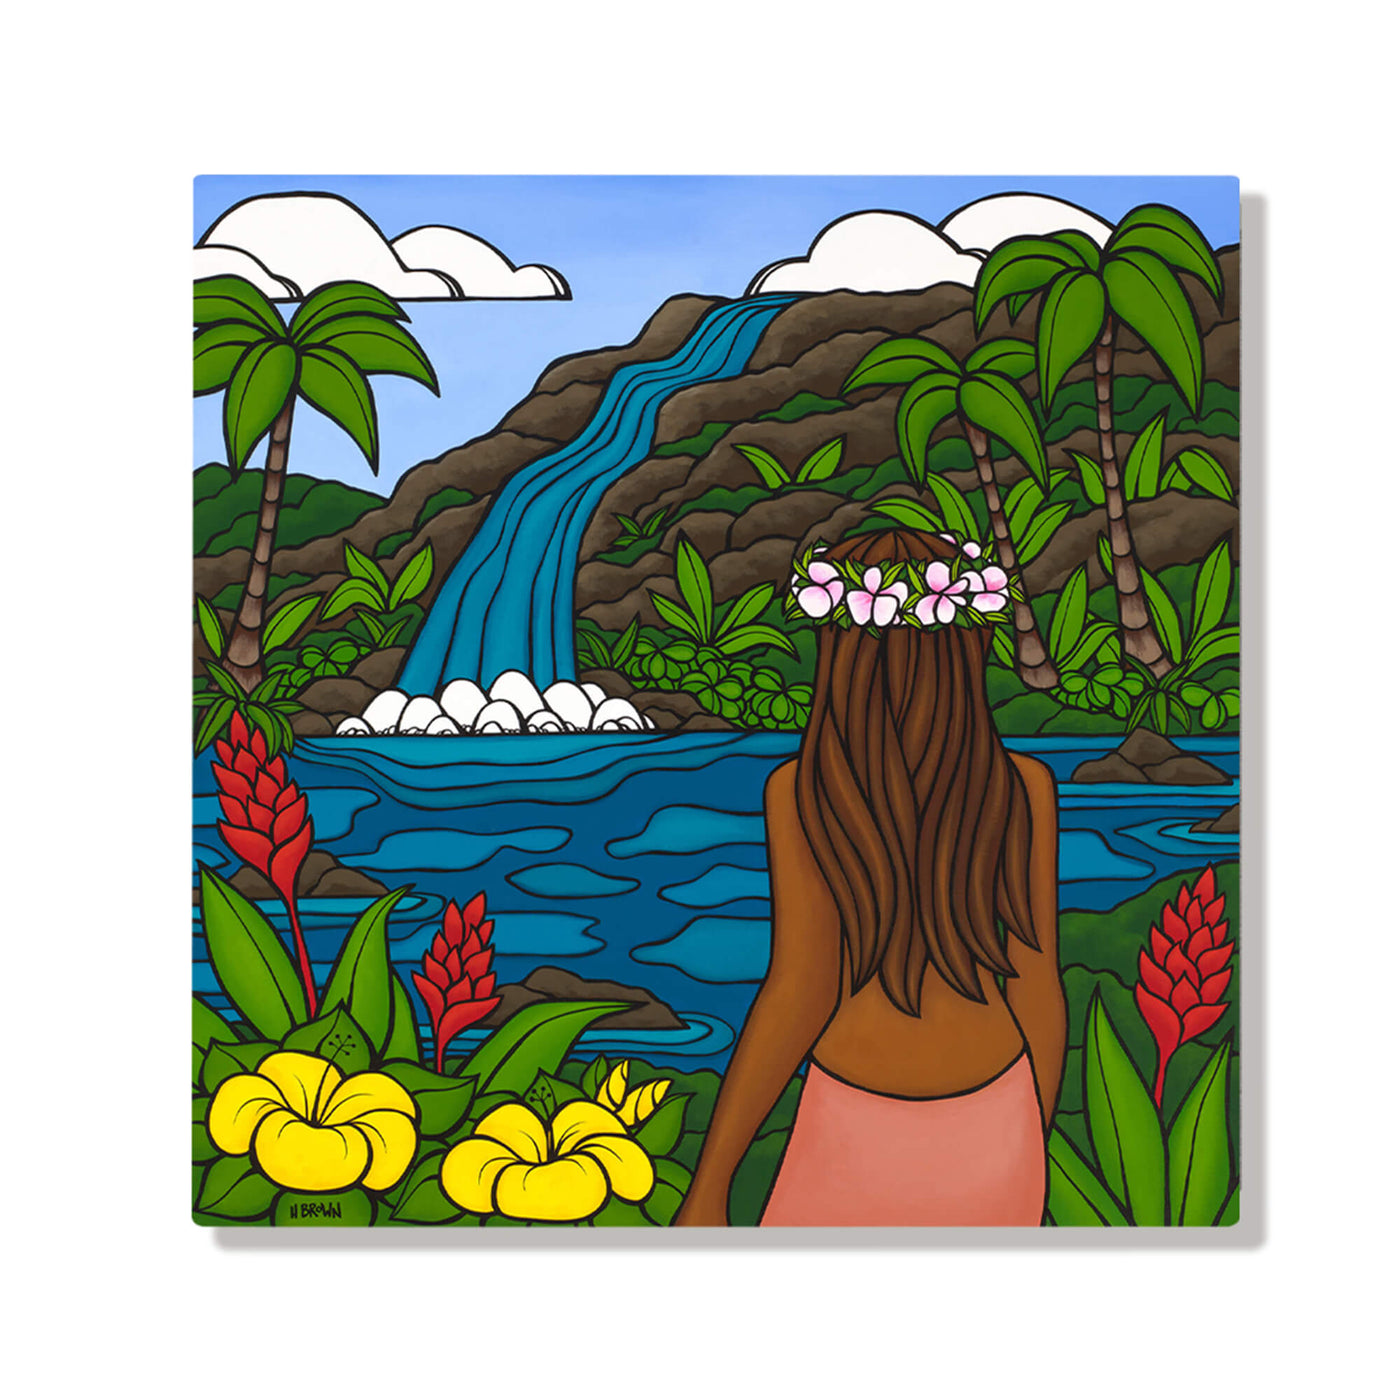 A metal art print of a local woman enjoying the waterfall view with colorful tropical flowers surrounding her by Hawaii surf artist Heather Brown